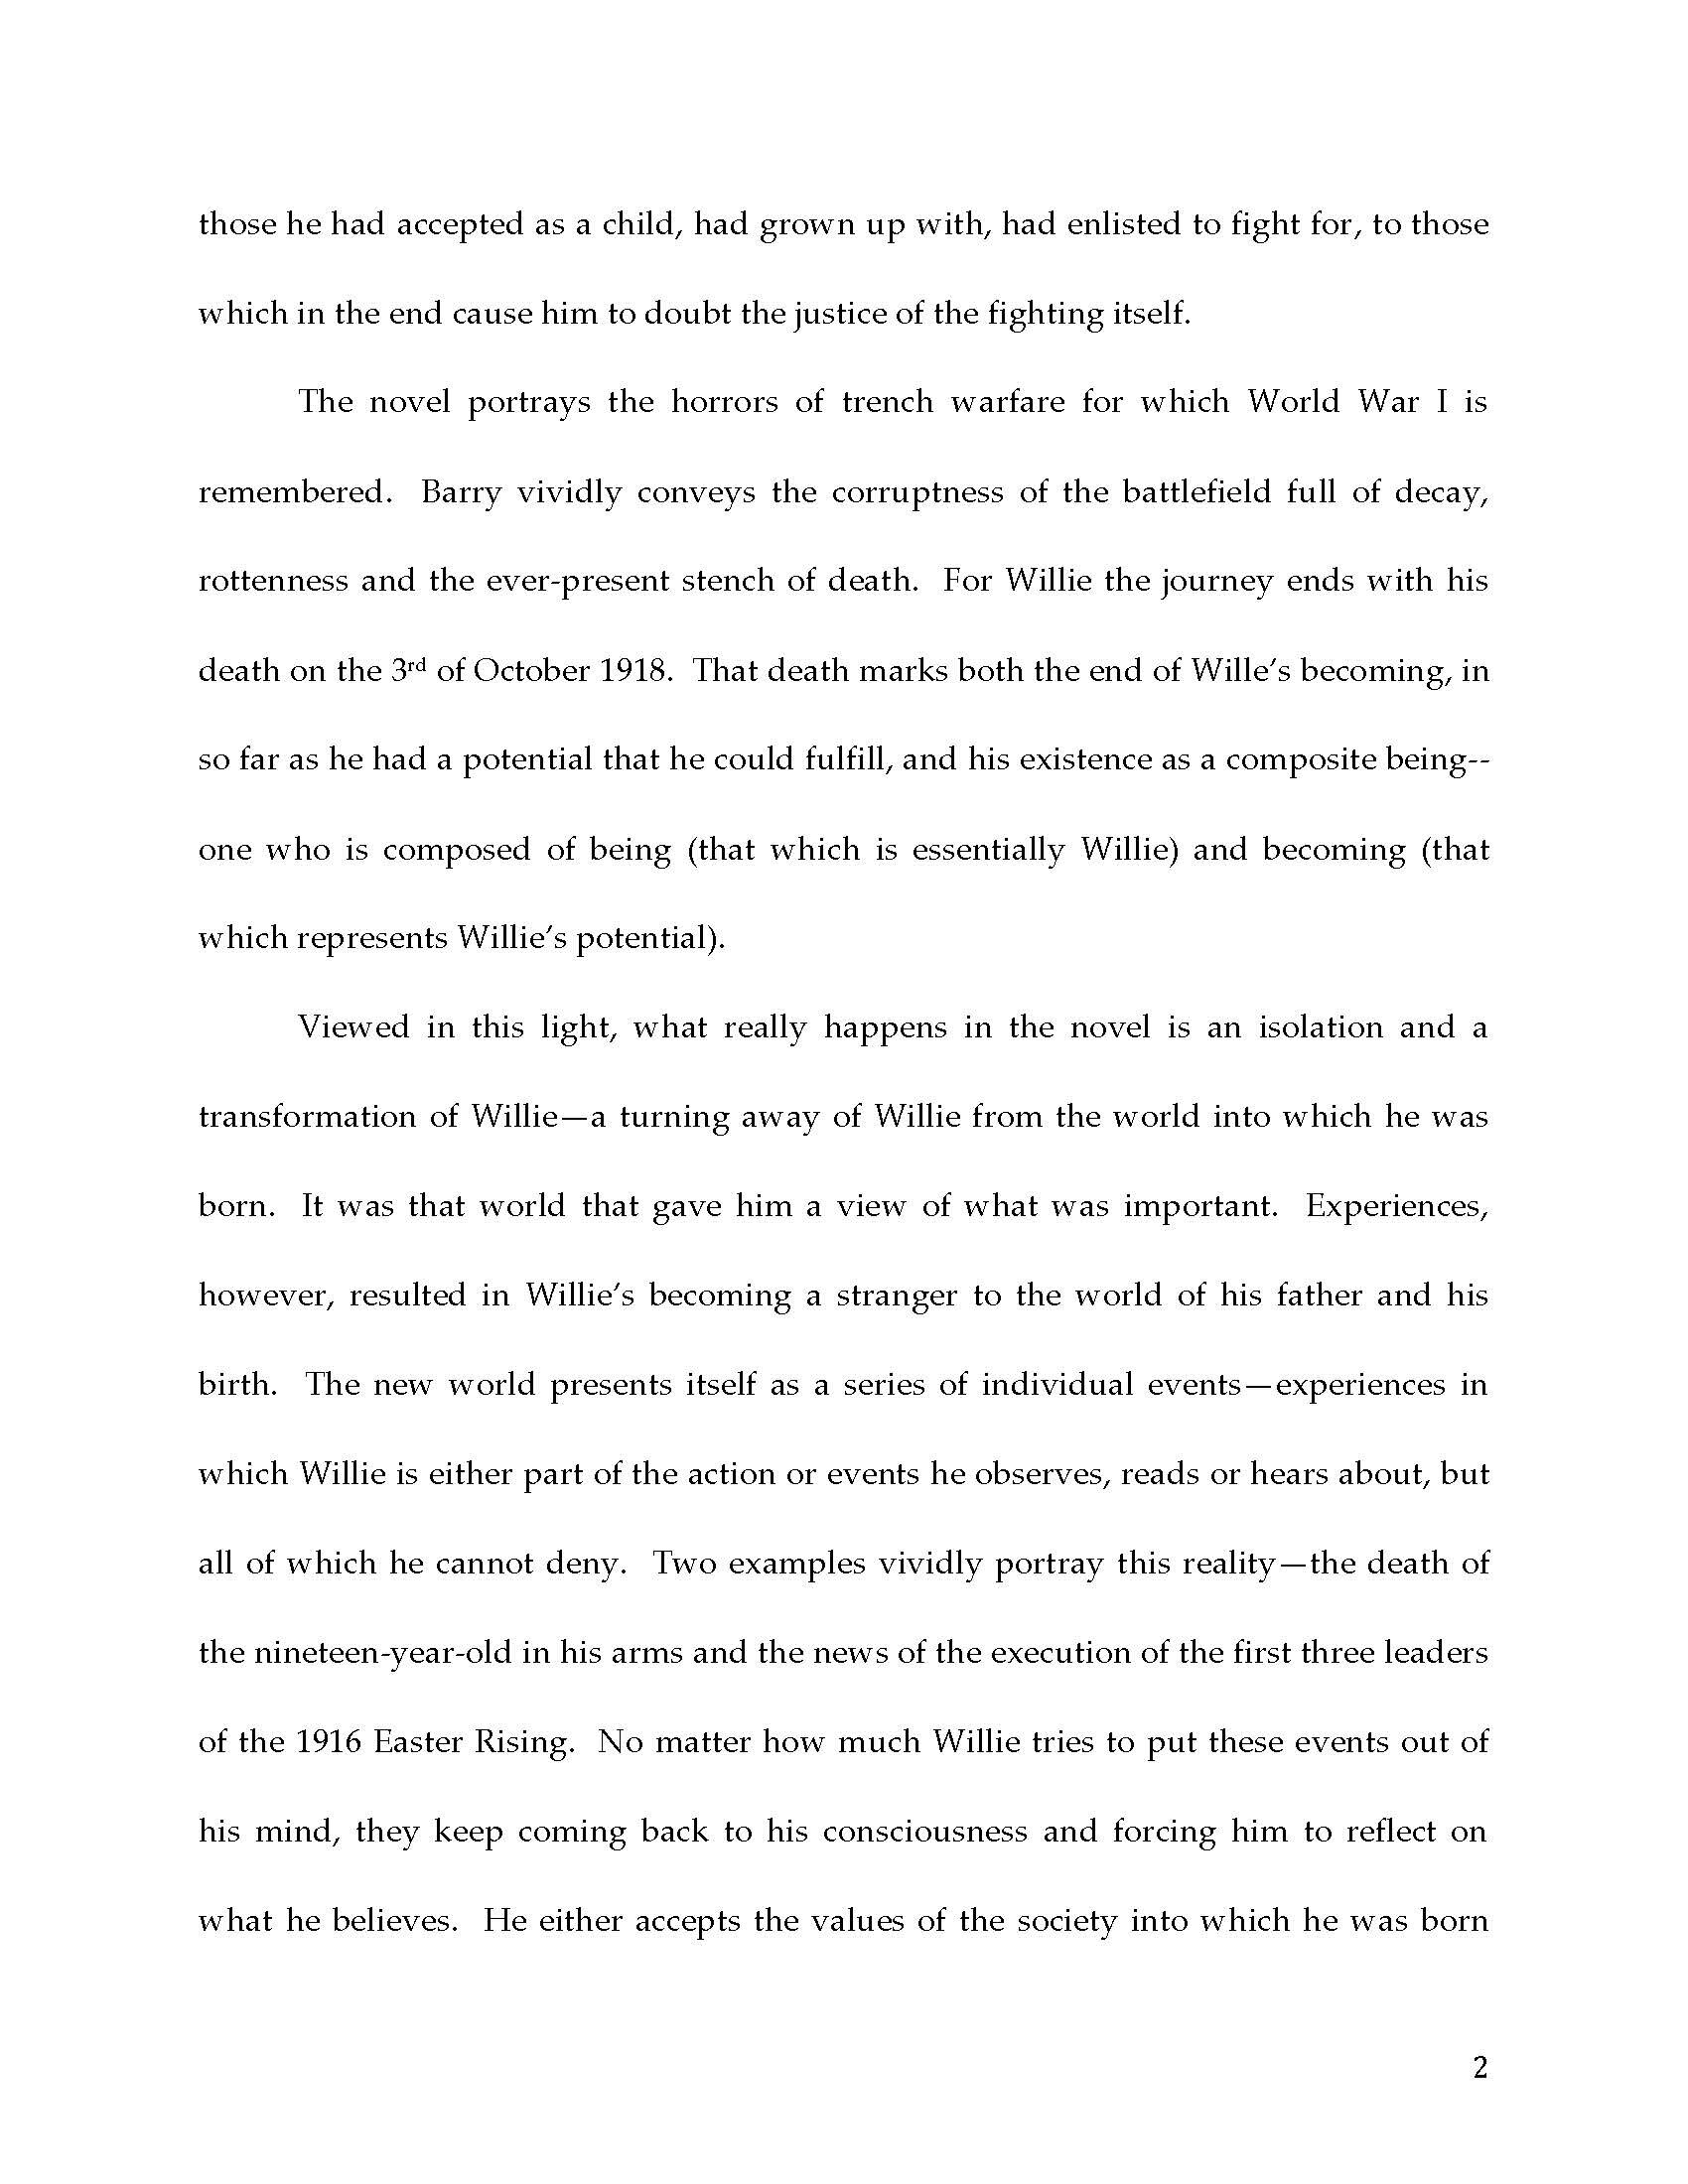 Becoming William Dunne_Paper_NAOMS_Page_02.jpg